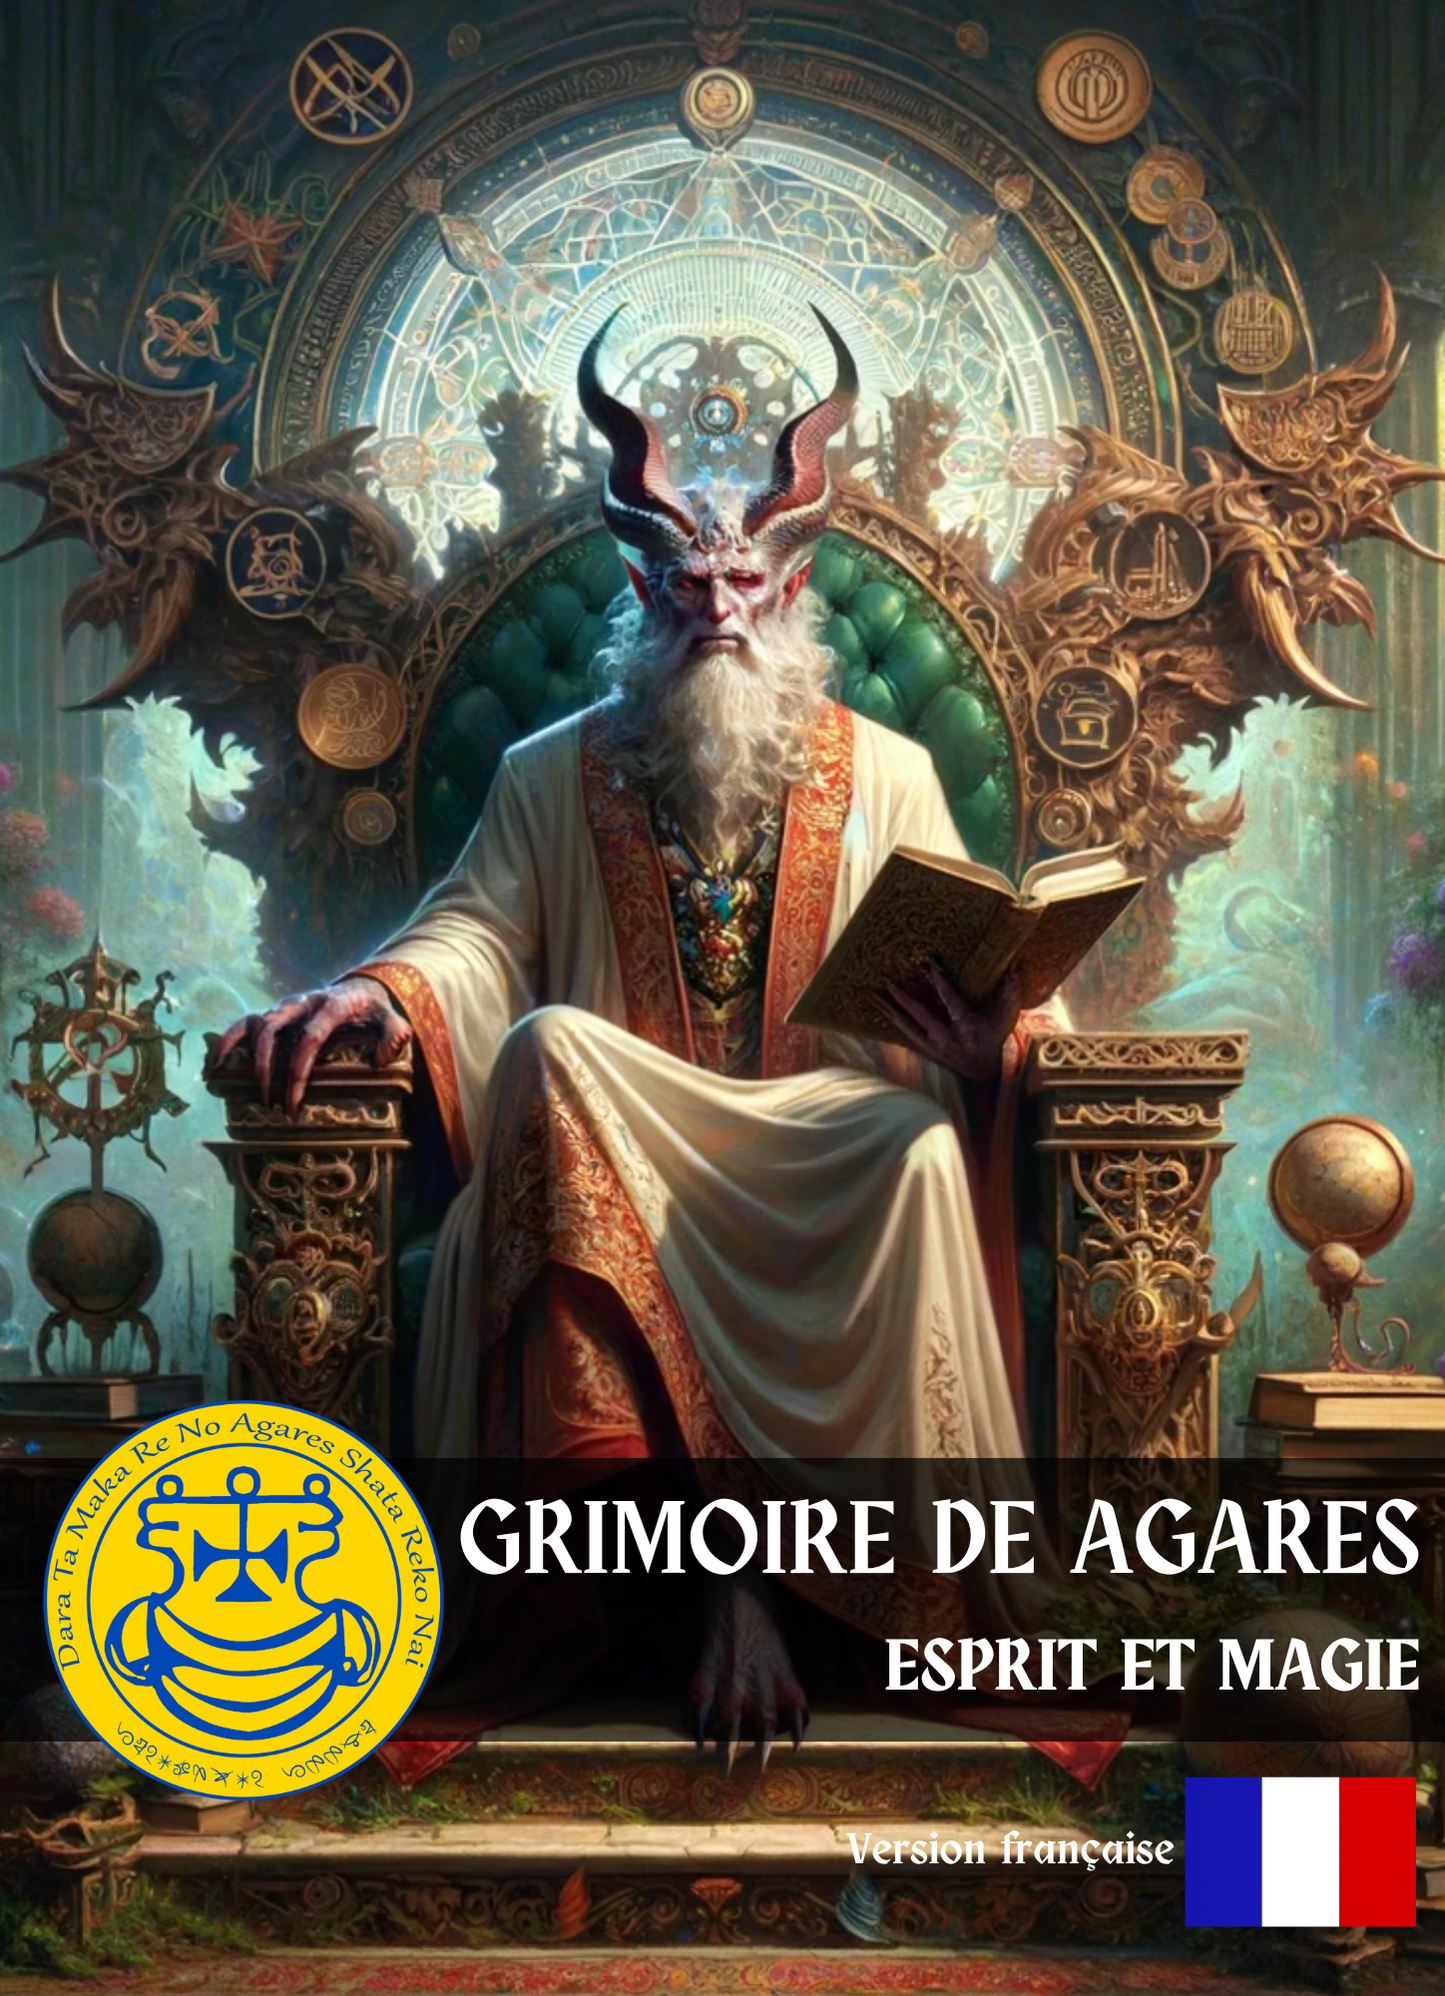 Grimoire of Agares Spells & Rituals for Friendship and Social Contacts to Empower Yourself - Abraxas Amulets ® Magic ♾️ Talismans ♾️ Kohungahunga